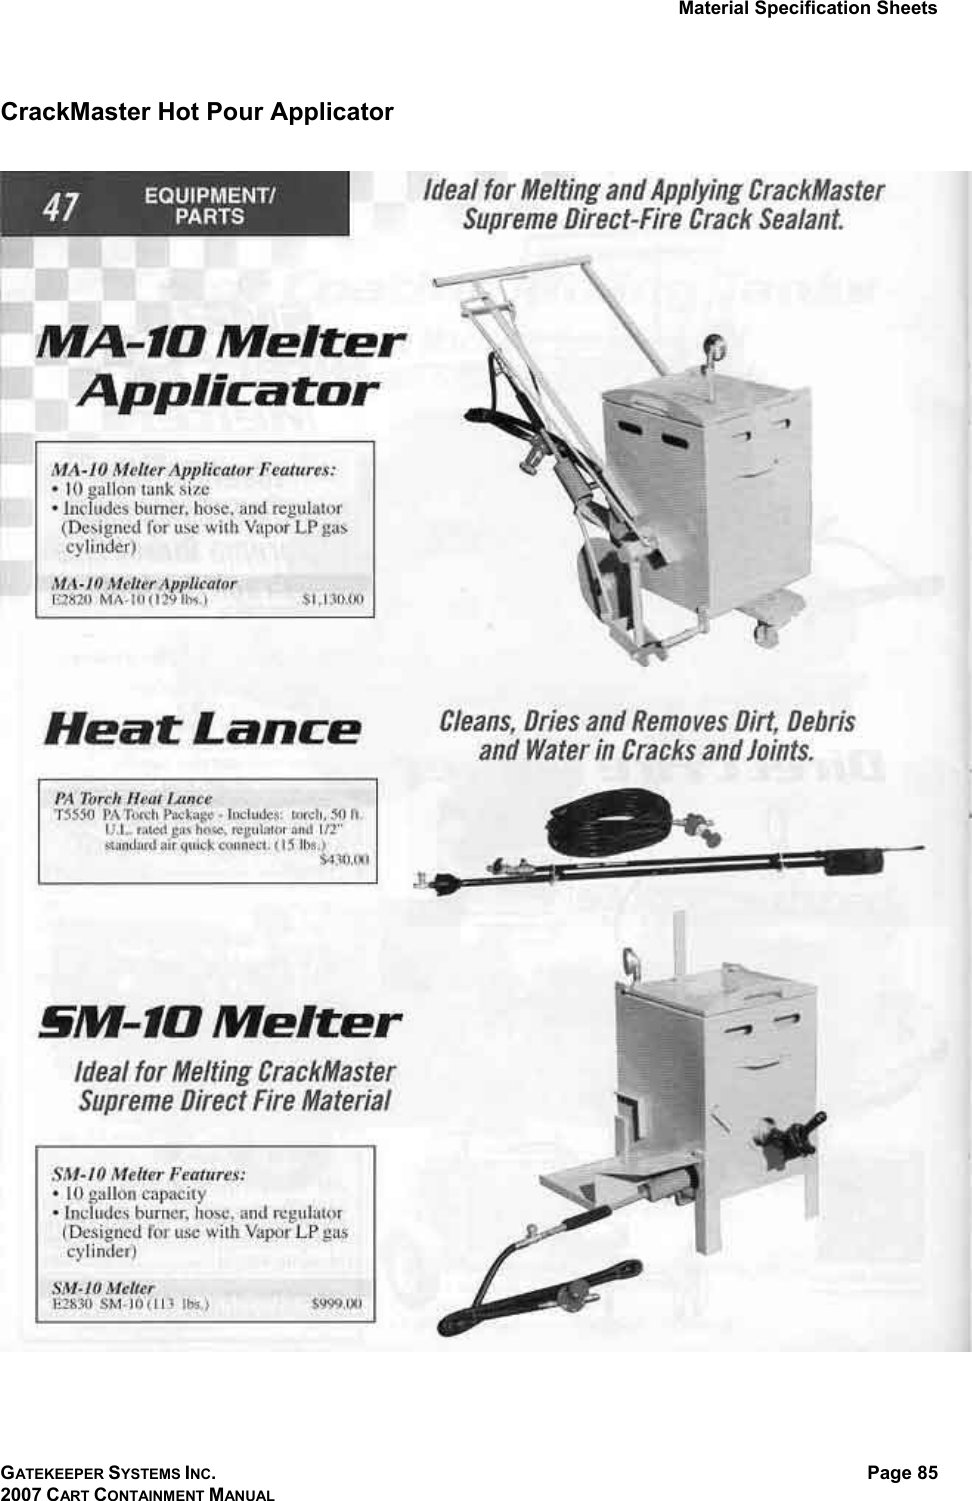 Material Specification Sheets GATEKEEPER SYSTEMS INC. 2007 CART CONTAINMENT MANUAL Page 85  CrackMaster Hot Pour Applicator    